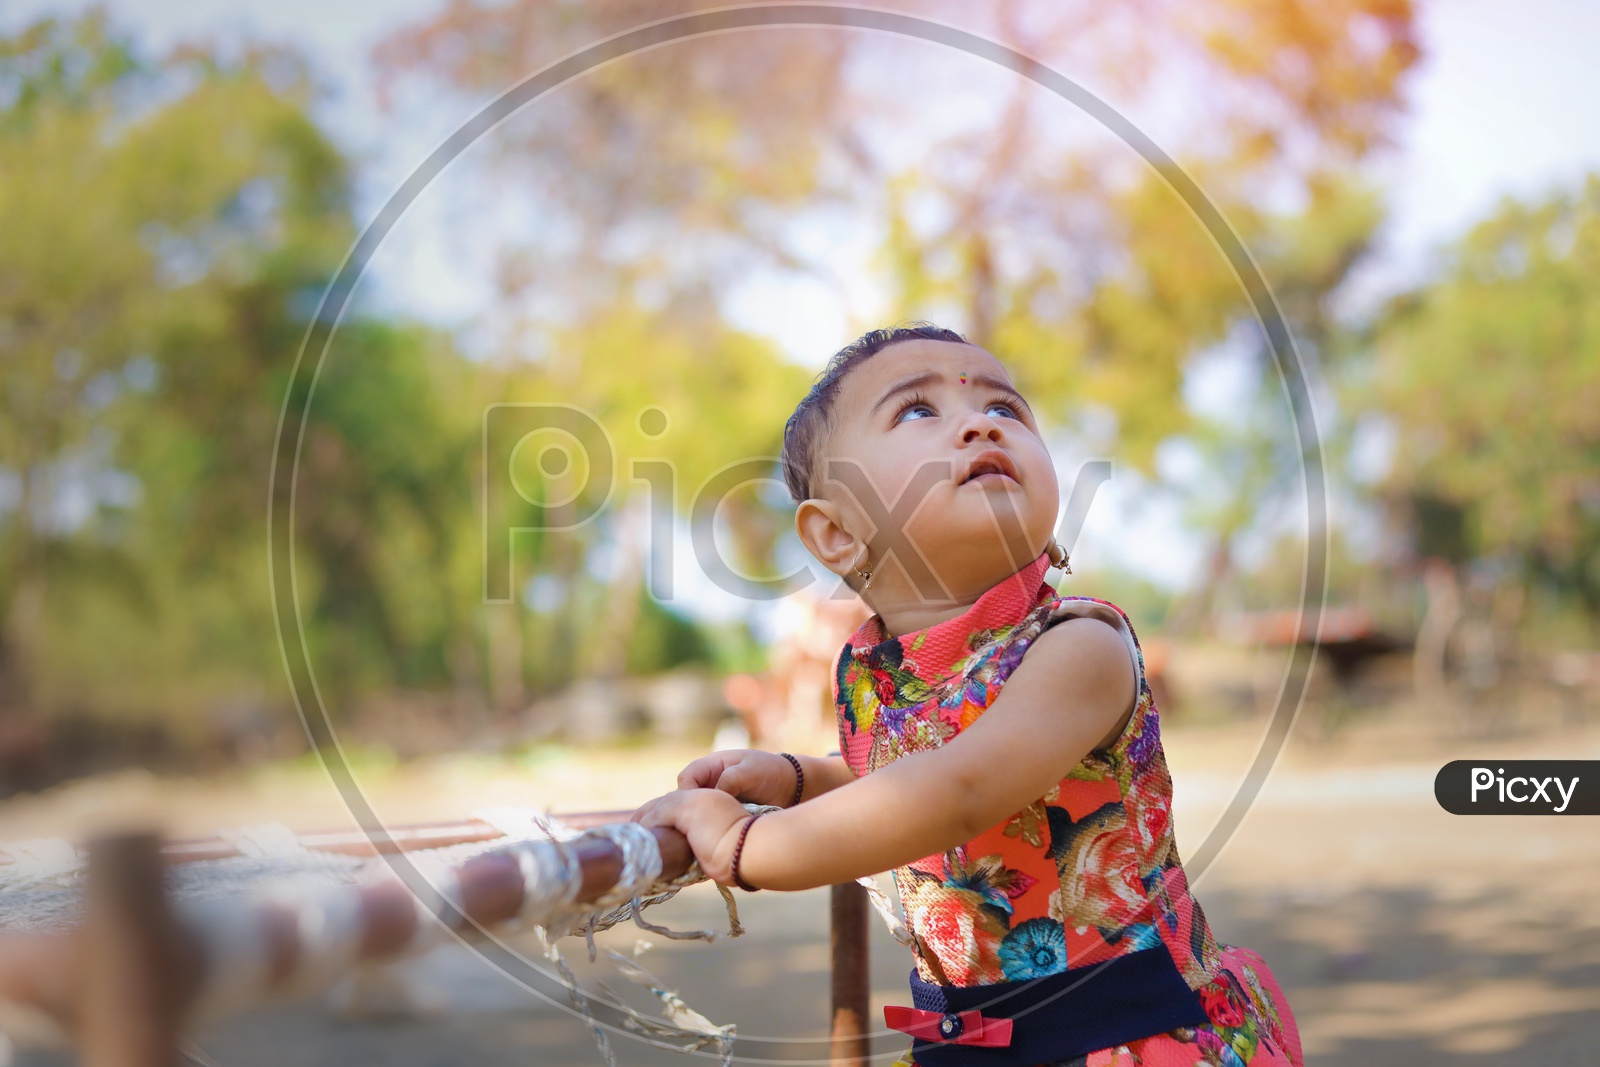 Baby girl playing with a flower near a cot